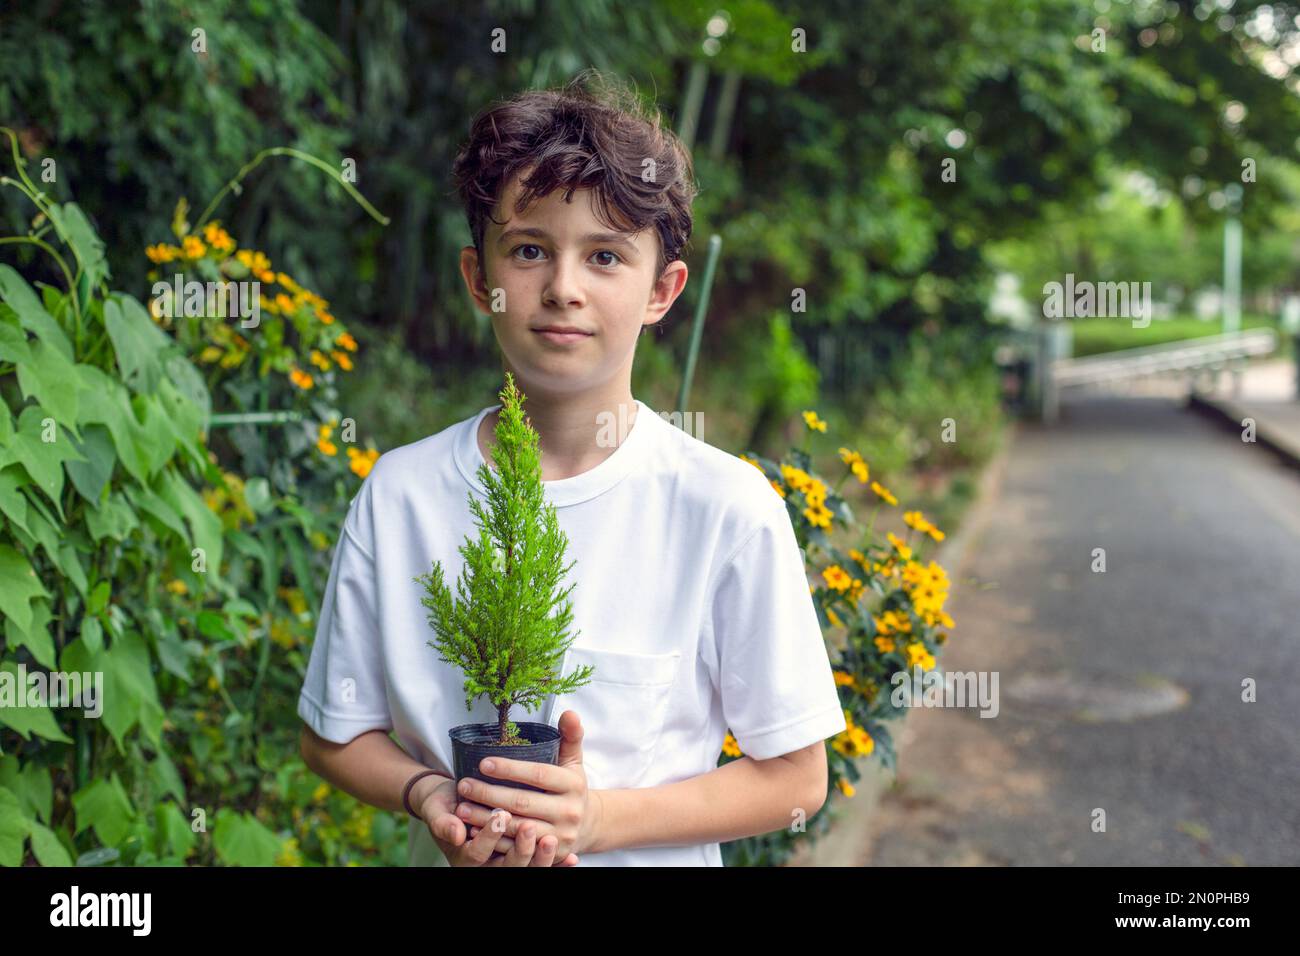 A boy holding a small tree sapling in a pot, standing in a garden. Stock Photo